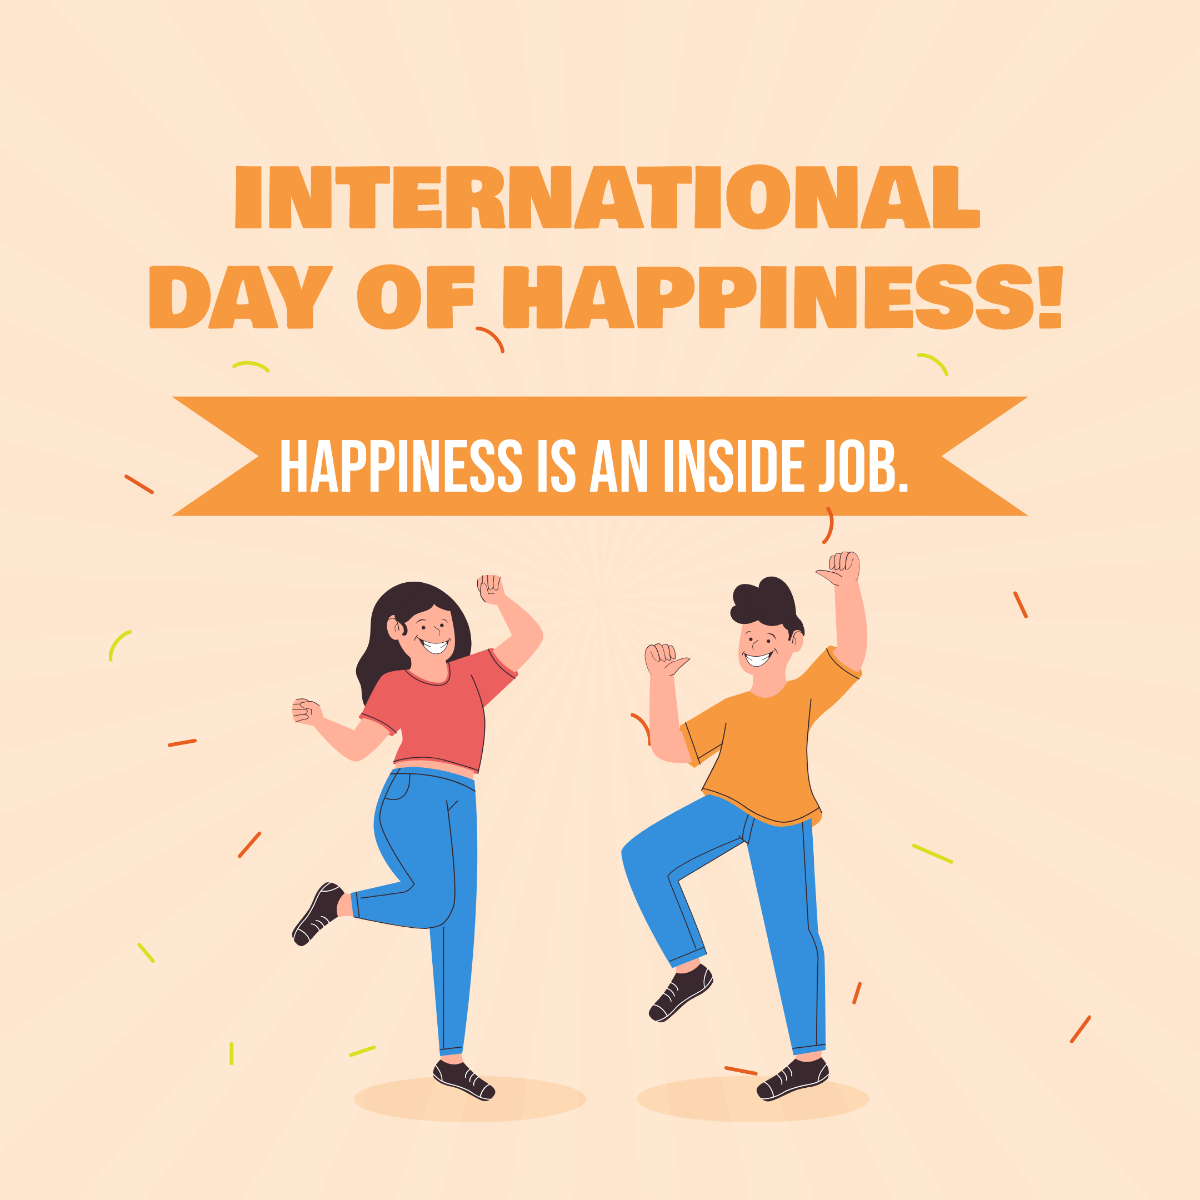 International Day of Happiness Instagram Post